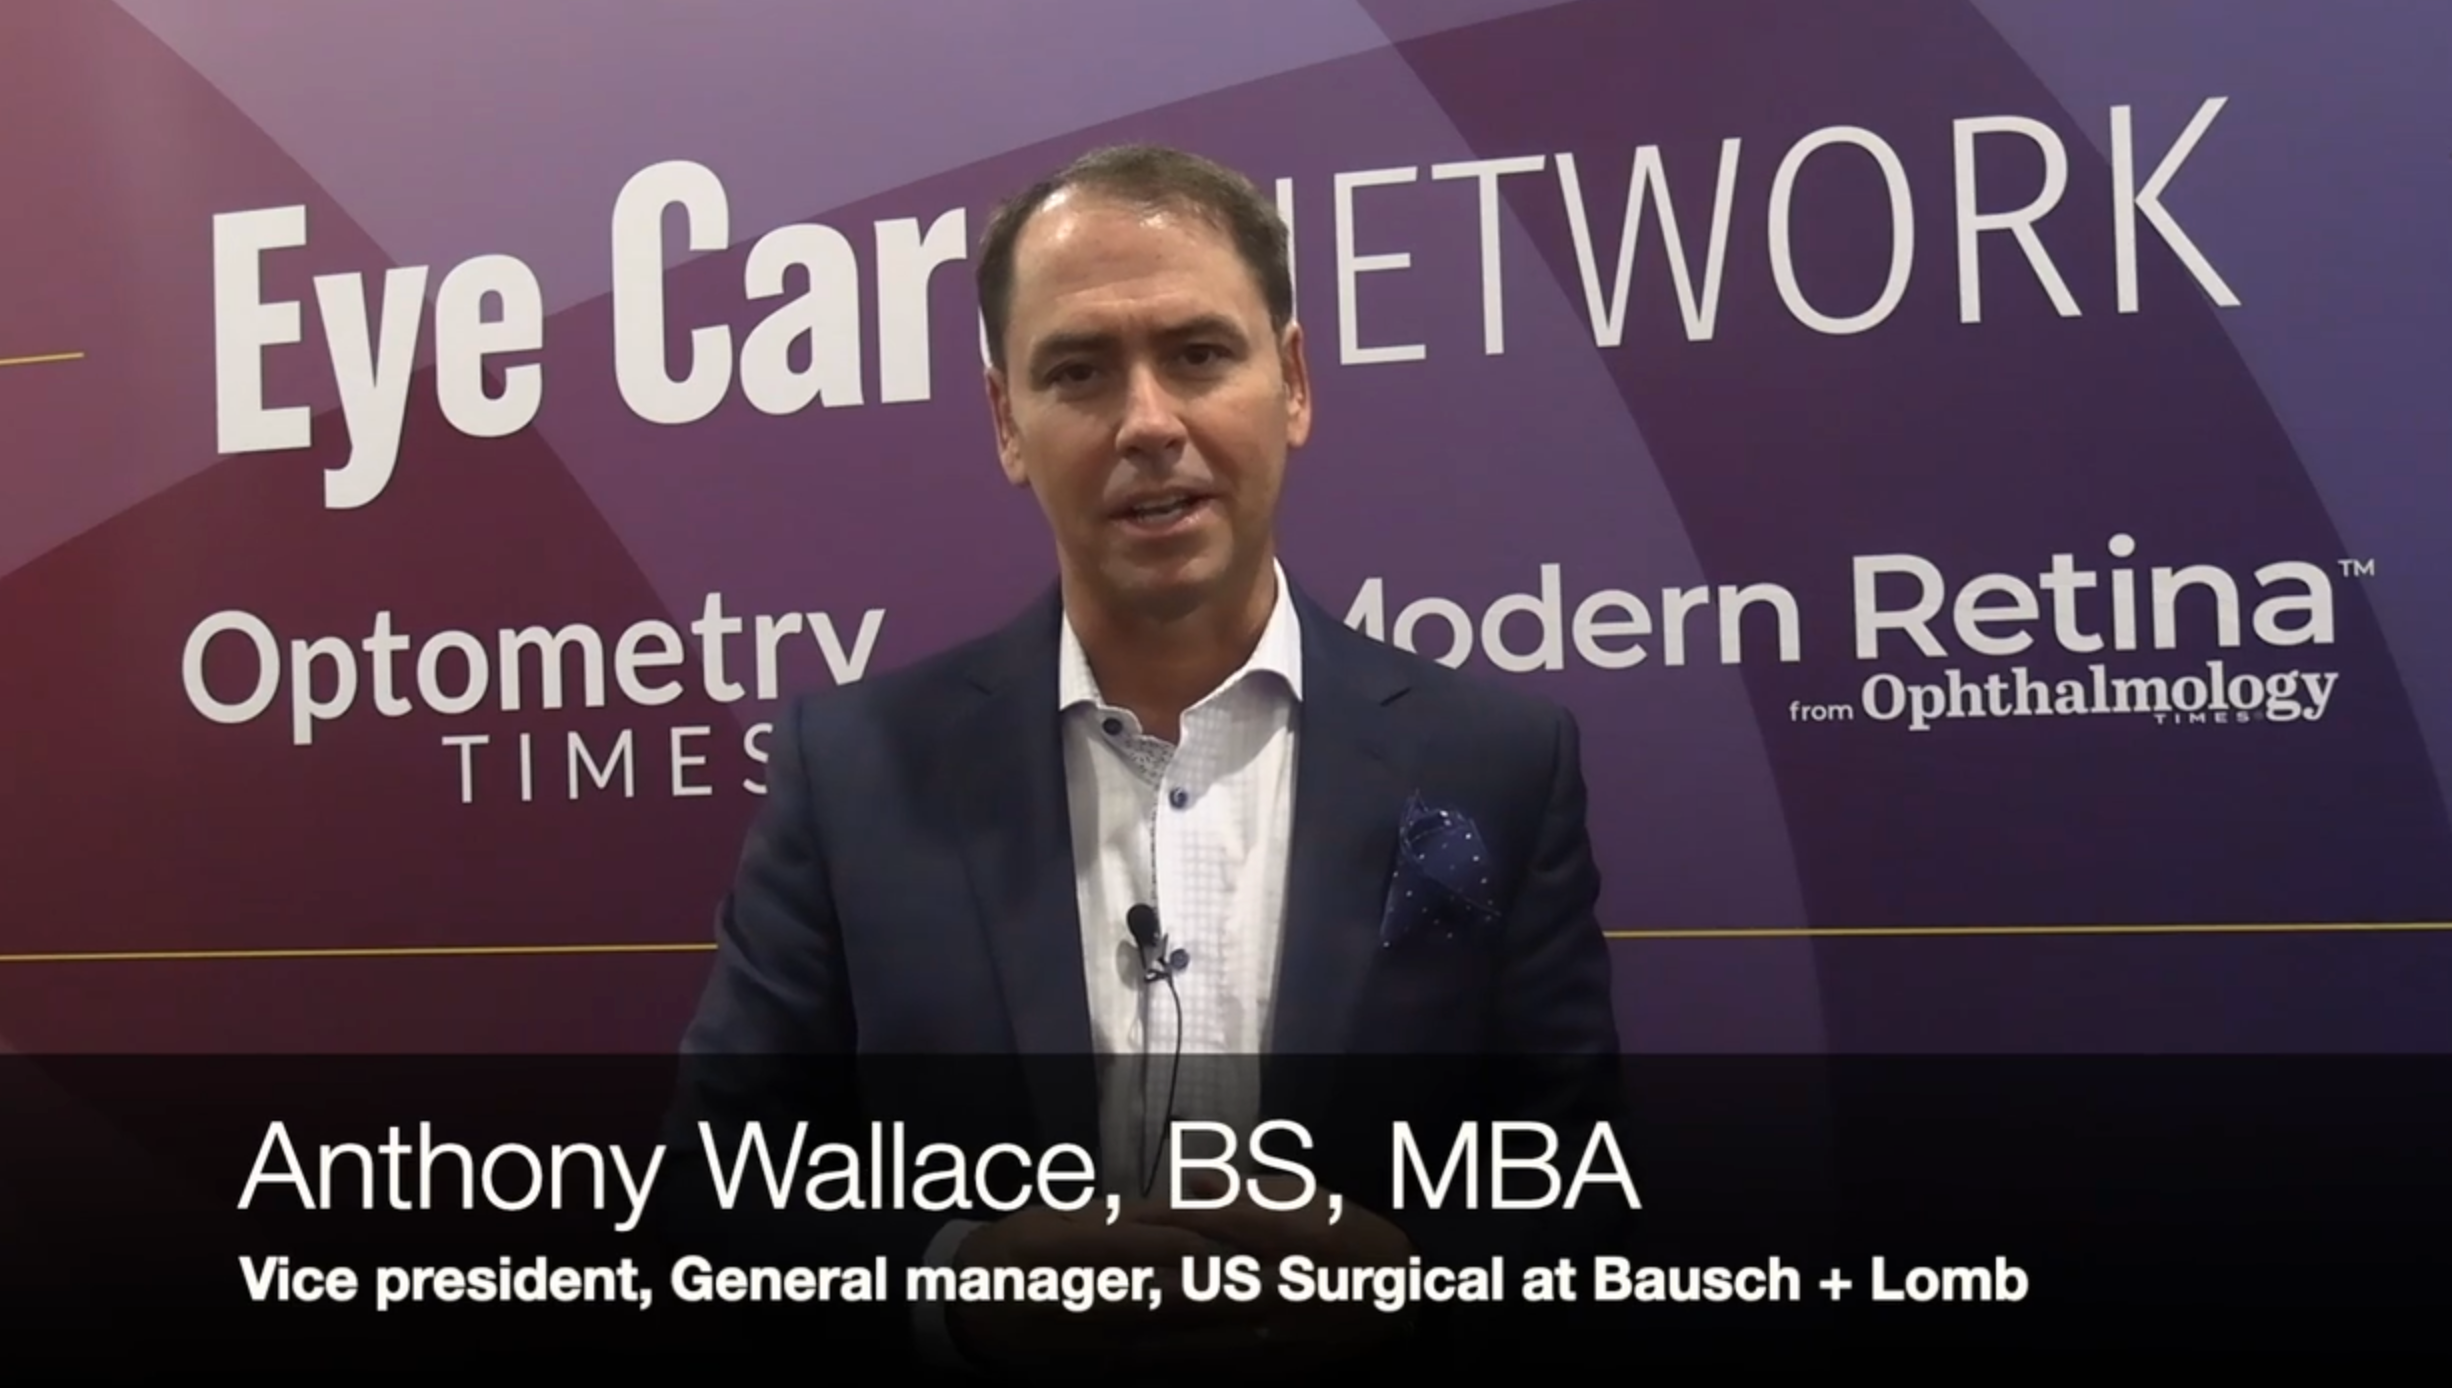 AAO 2023: Three technologies from this year's new launches at Bausch + Lomb